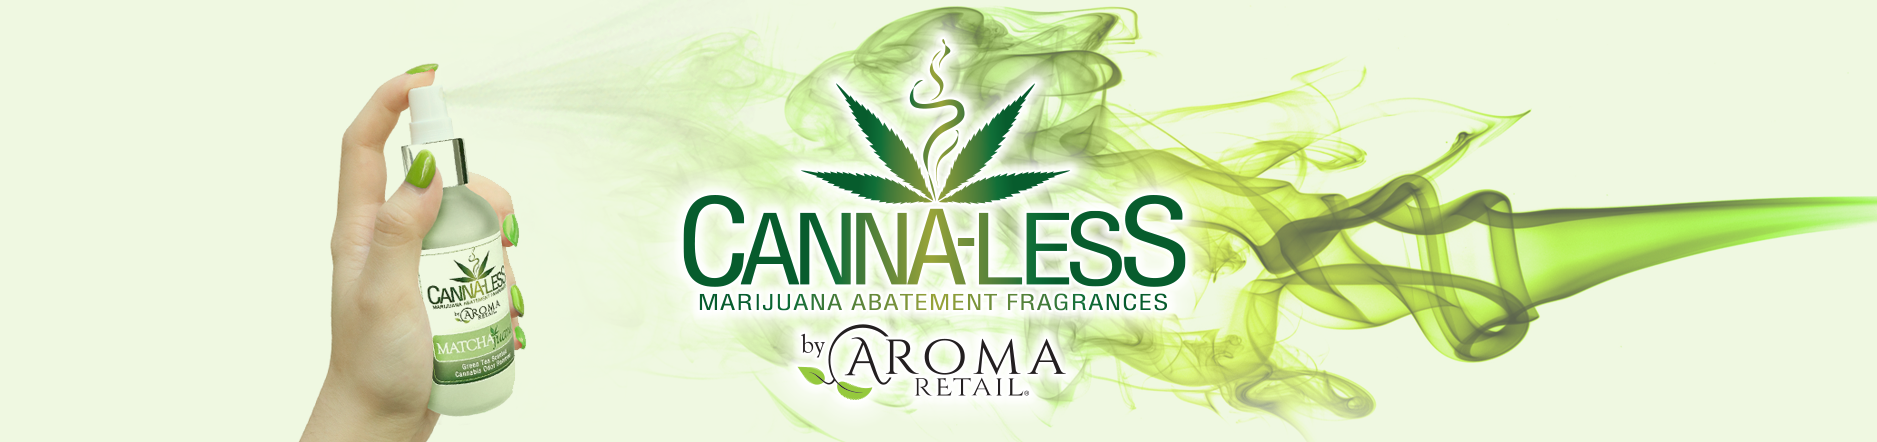 canna-less cannaless canna less marijuana abatement fragrances by aroma retail home decor fragrance oil diffuser hotel resort collection